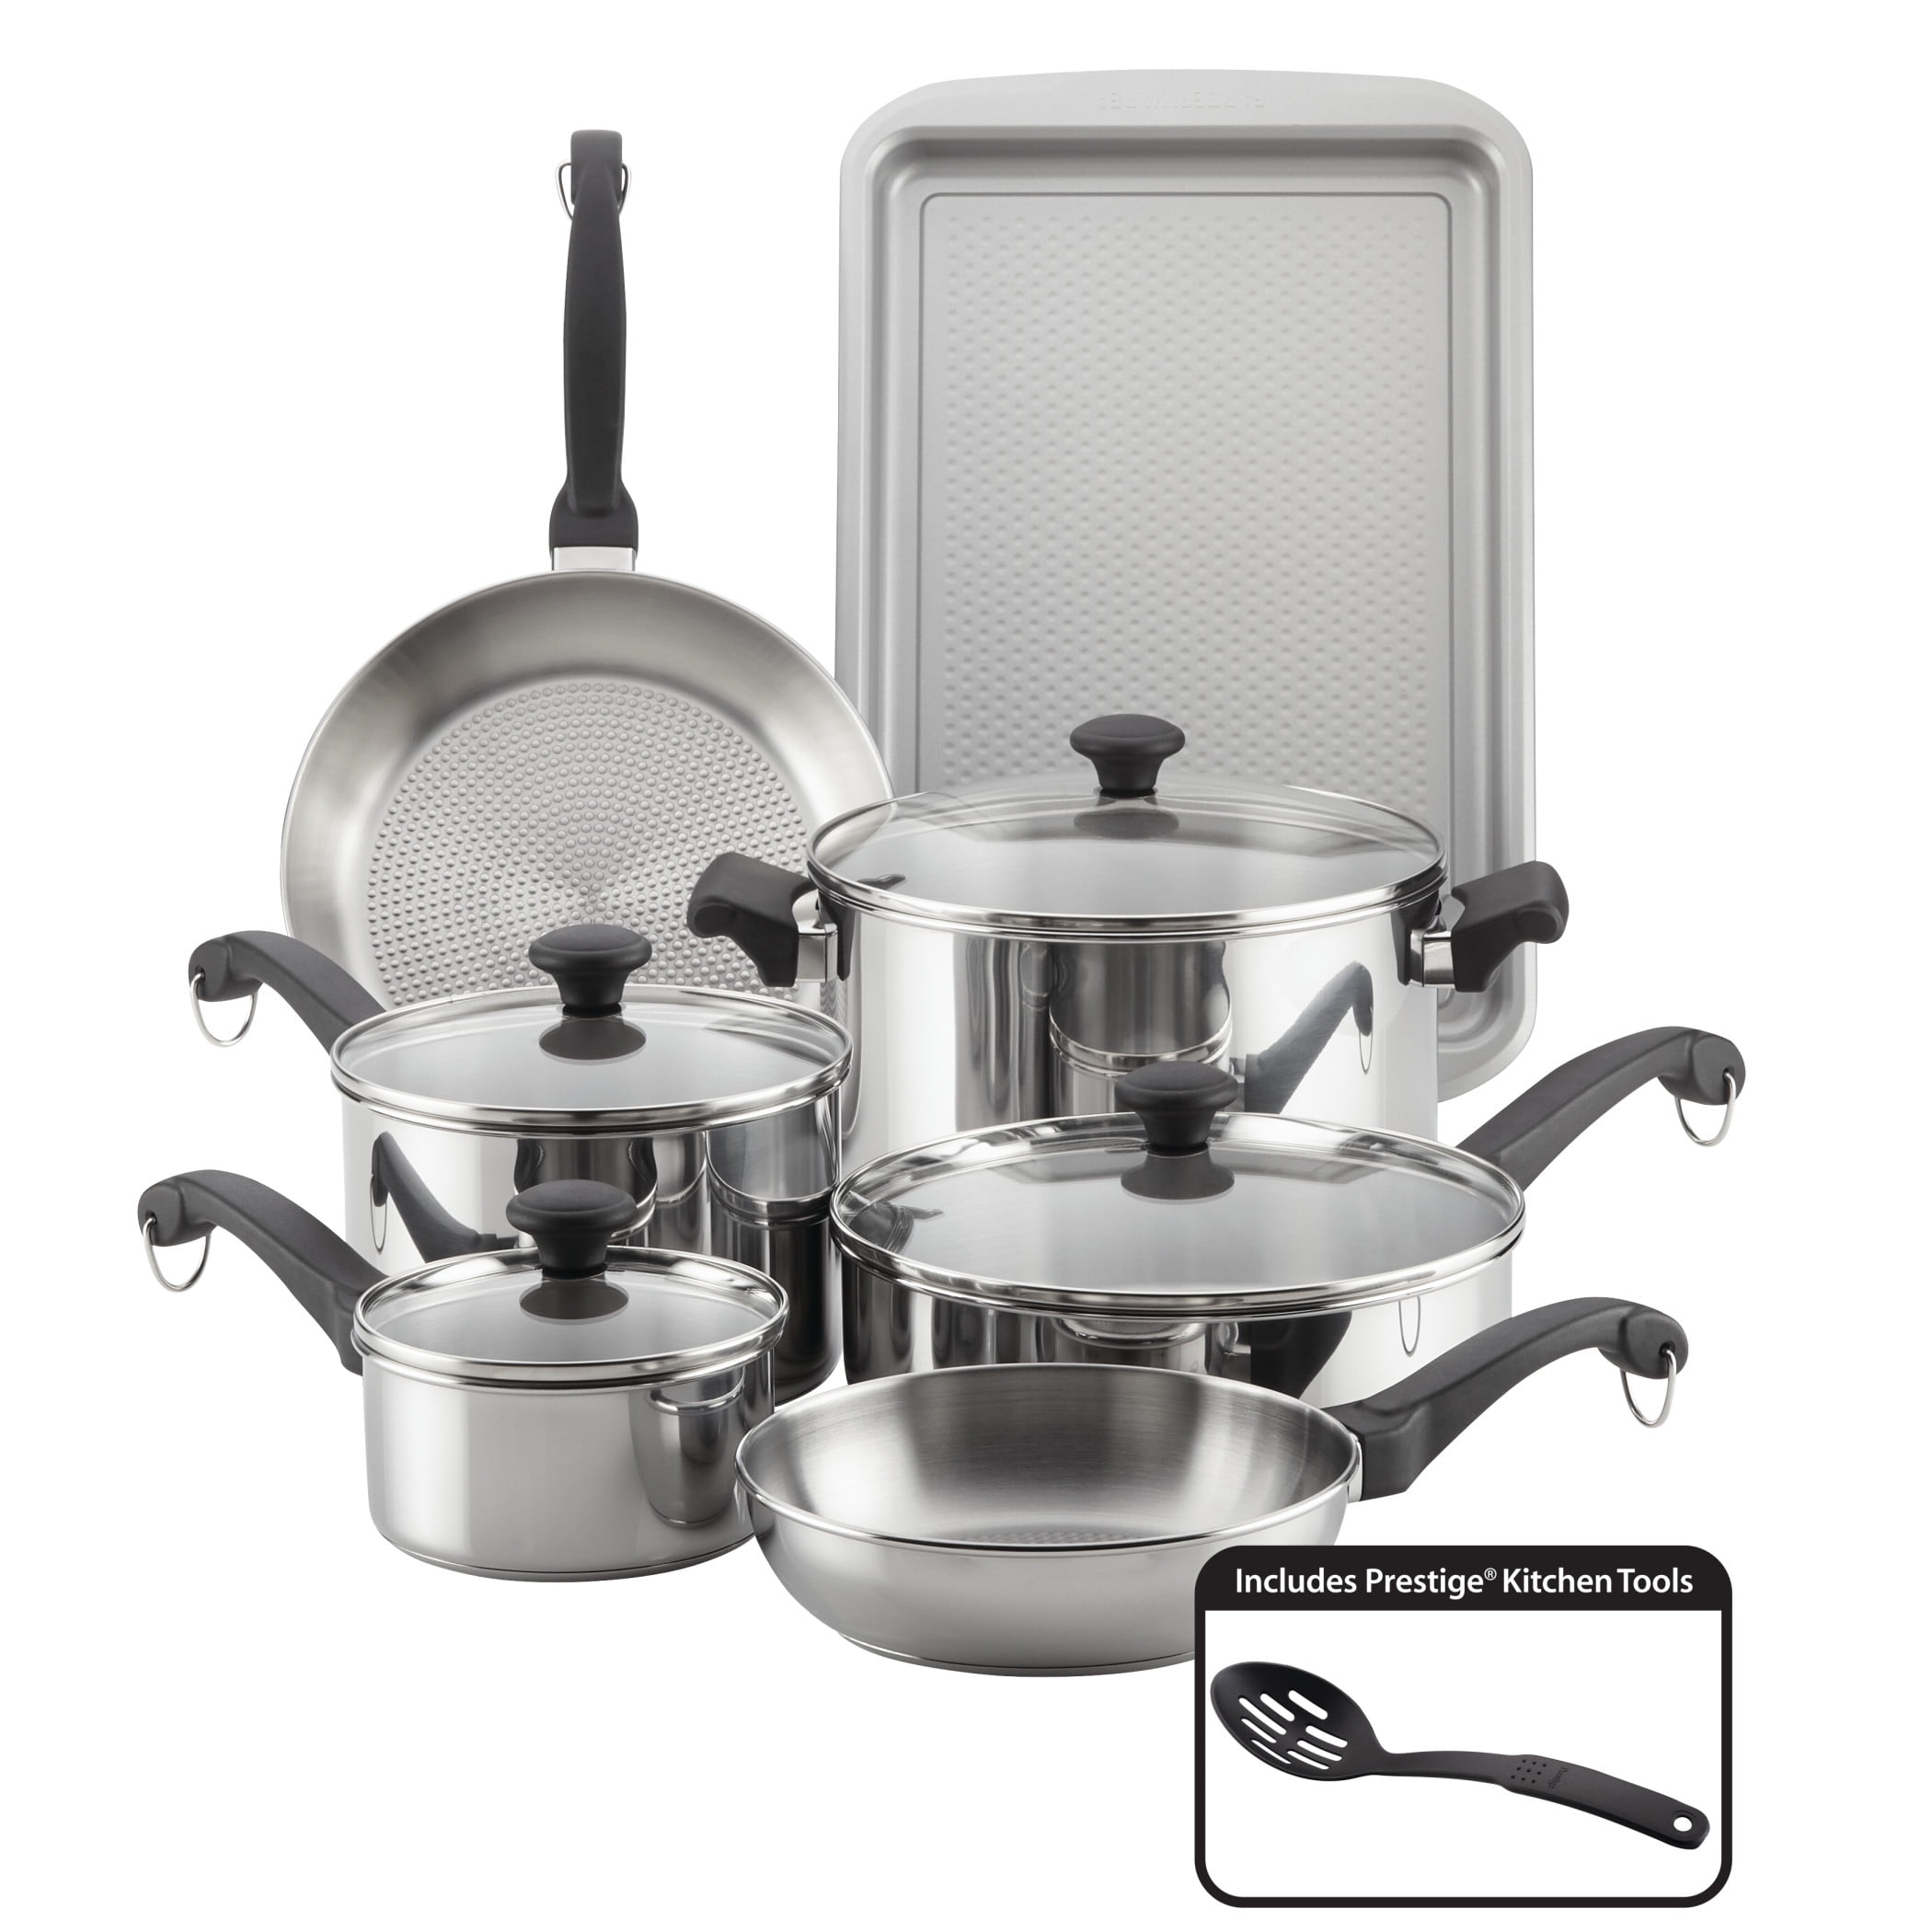 Details about   Cookware Set 52 Piece Kitchen Tools And Flatware Durable Stainless Steel Silver 